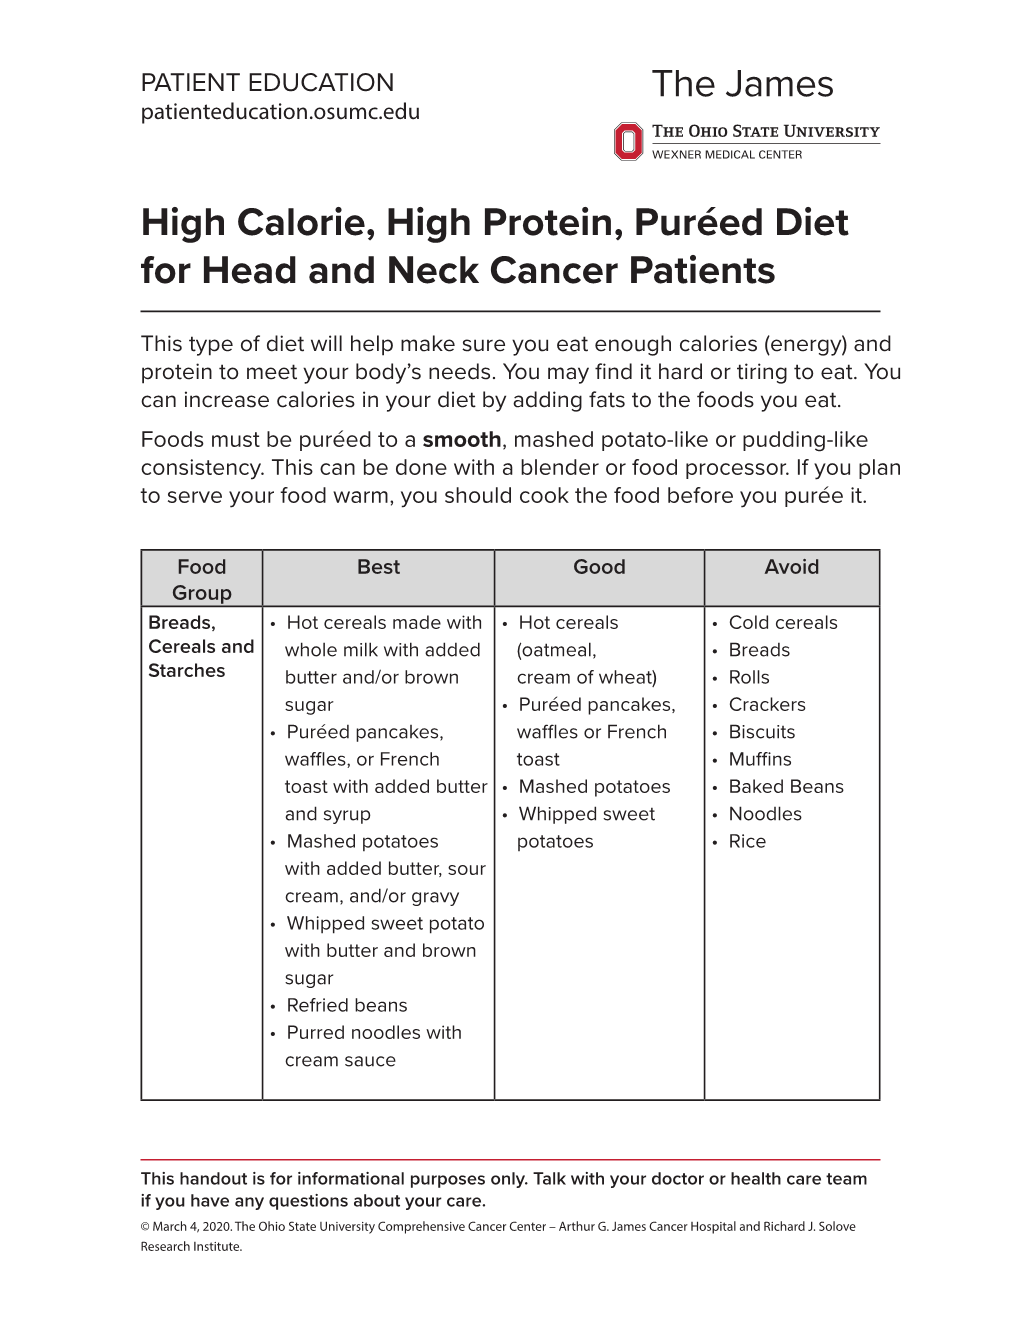 High Calorie, High Protein, Puréed Diet for Head and Neck Cancer Patients